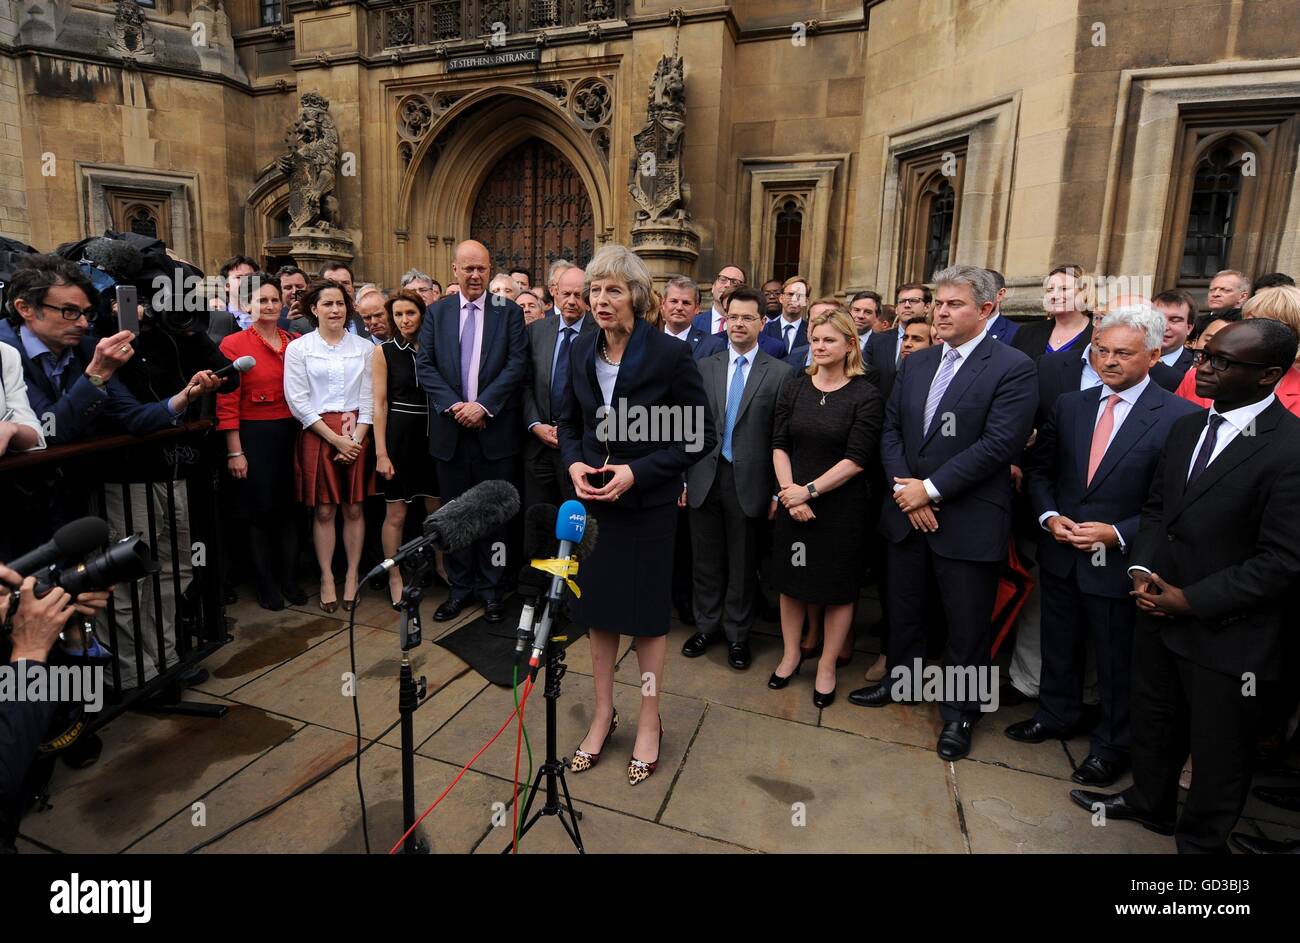 Theresa May outside the Houses of Parliament in Westminster, London, after she secured her place as the UK's second female prime minister through the surprise withdrawal of her only rival in the battle to succeed David Cameron. Stock Photo